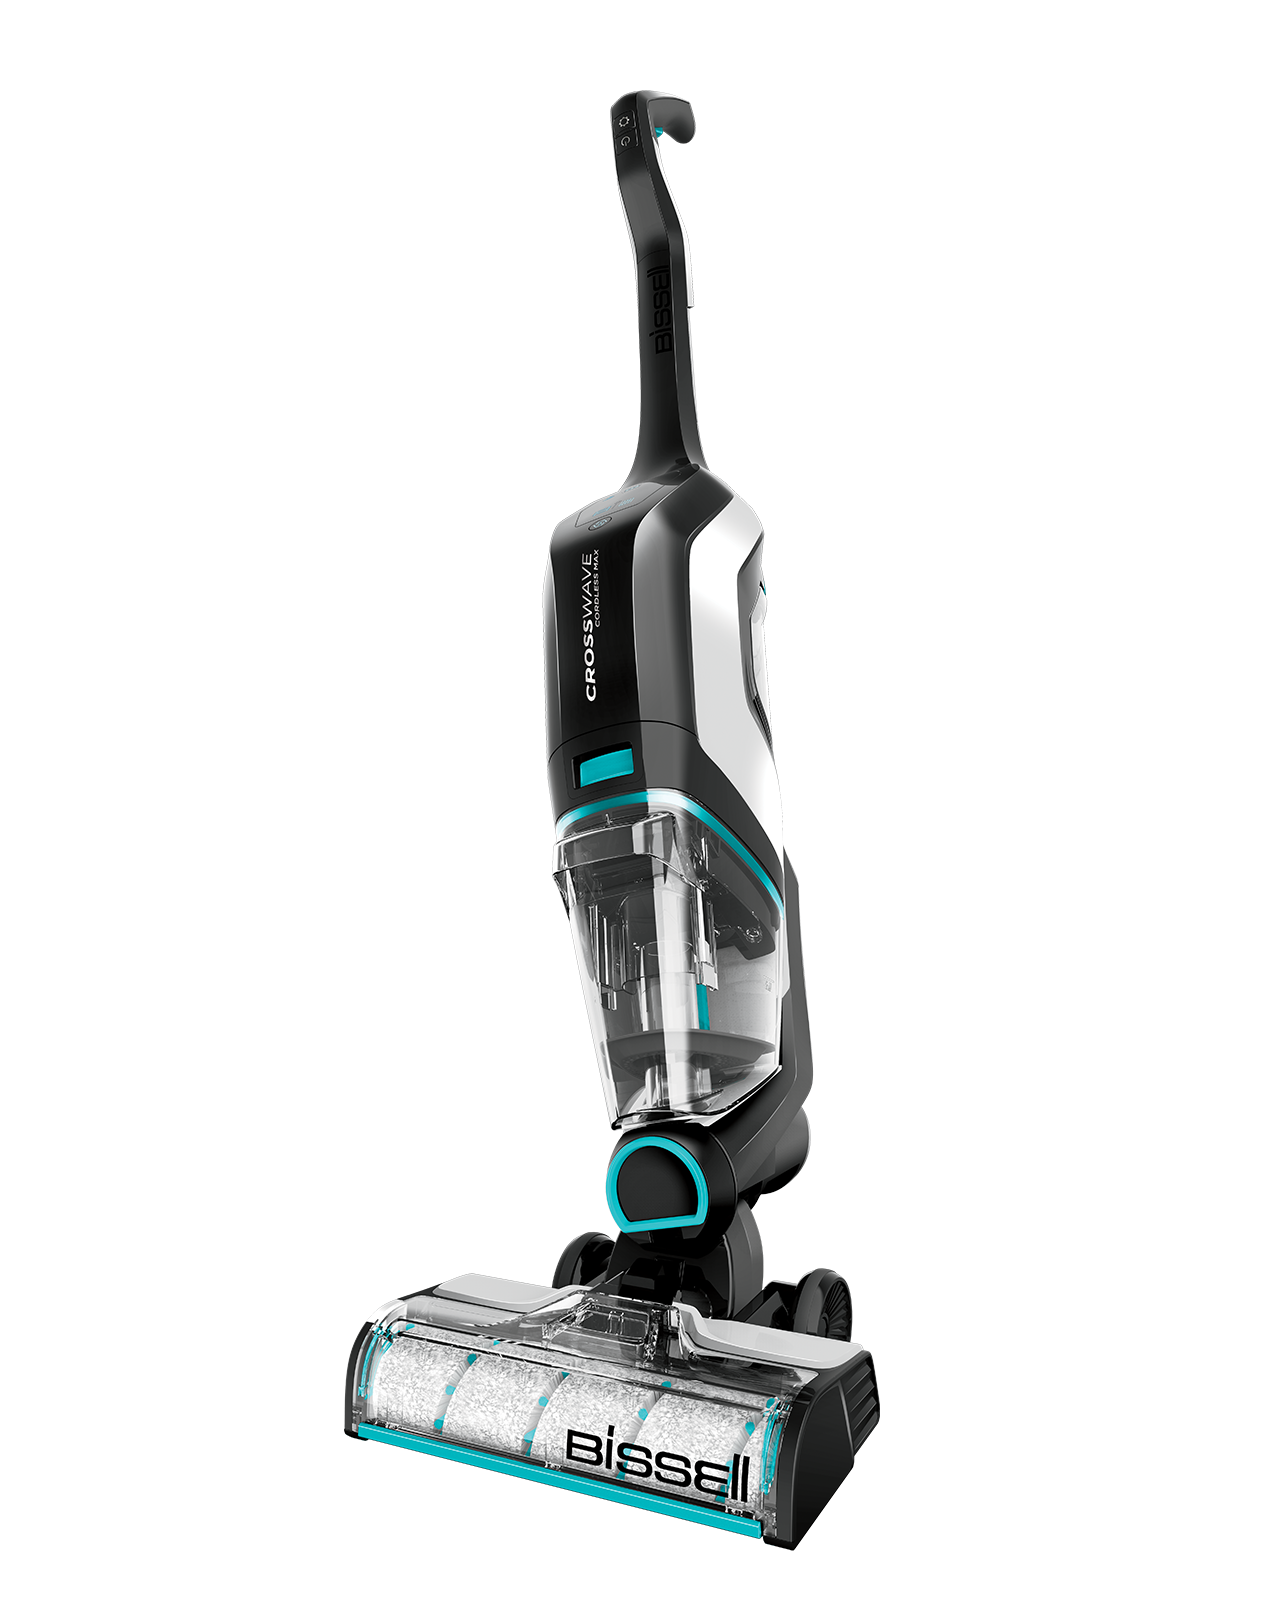 BISSELL, 2554A CrossWave Cordless Max All in One Wet-Dry Vacuum Cleaner and Mop for Hard Floors and Area Rugs, Black Pearl White with Electric Blue Accents